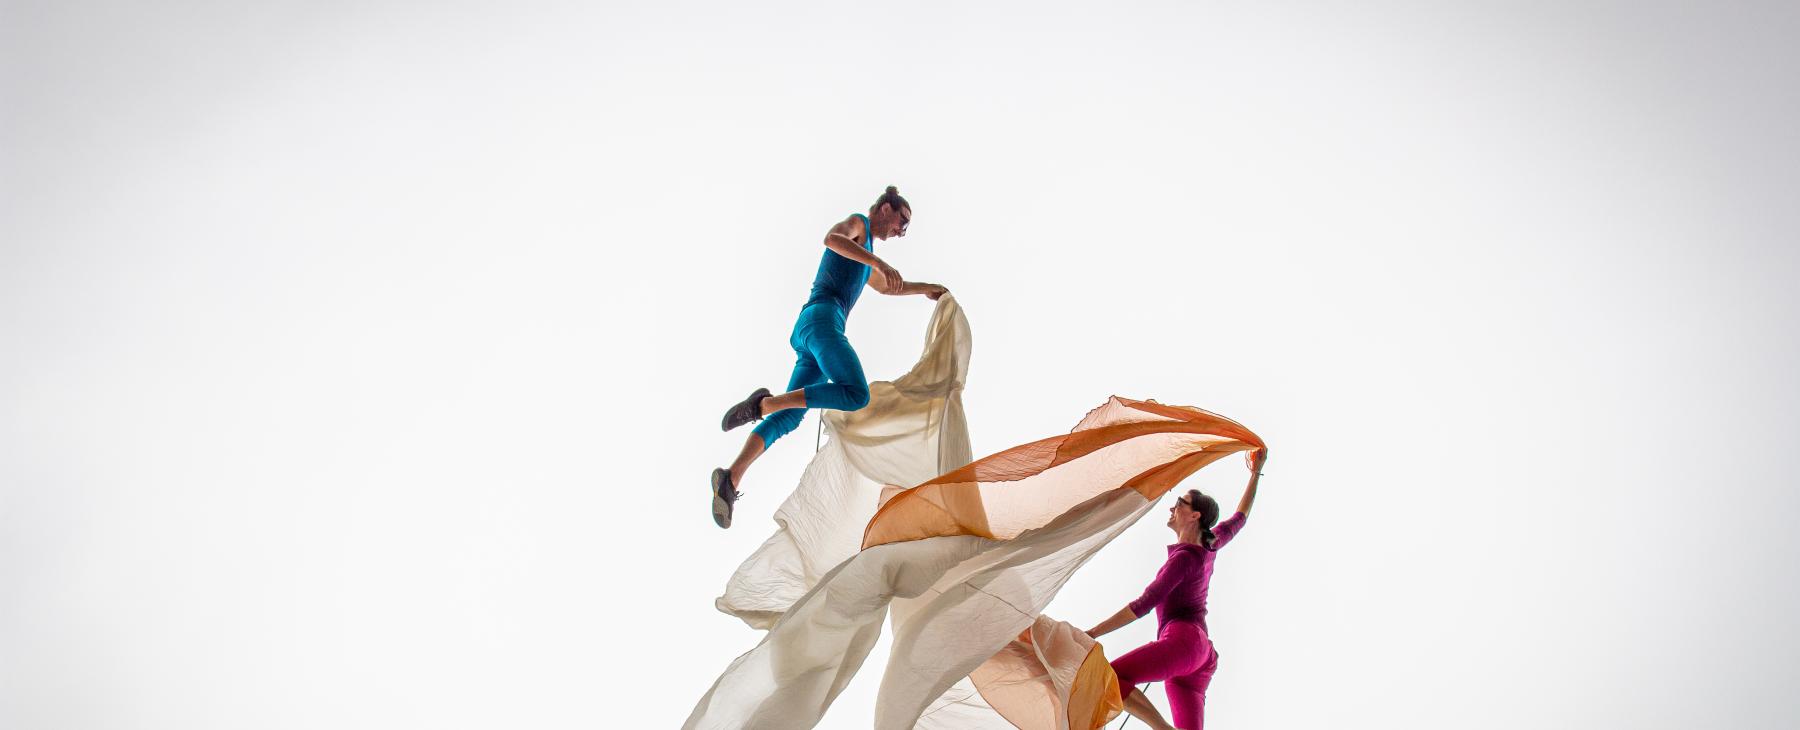 In a white void, two dancers (in brightly colored costumes) dance with orange and beige fabric.